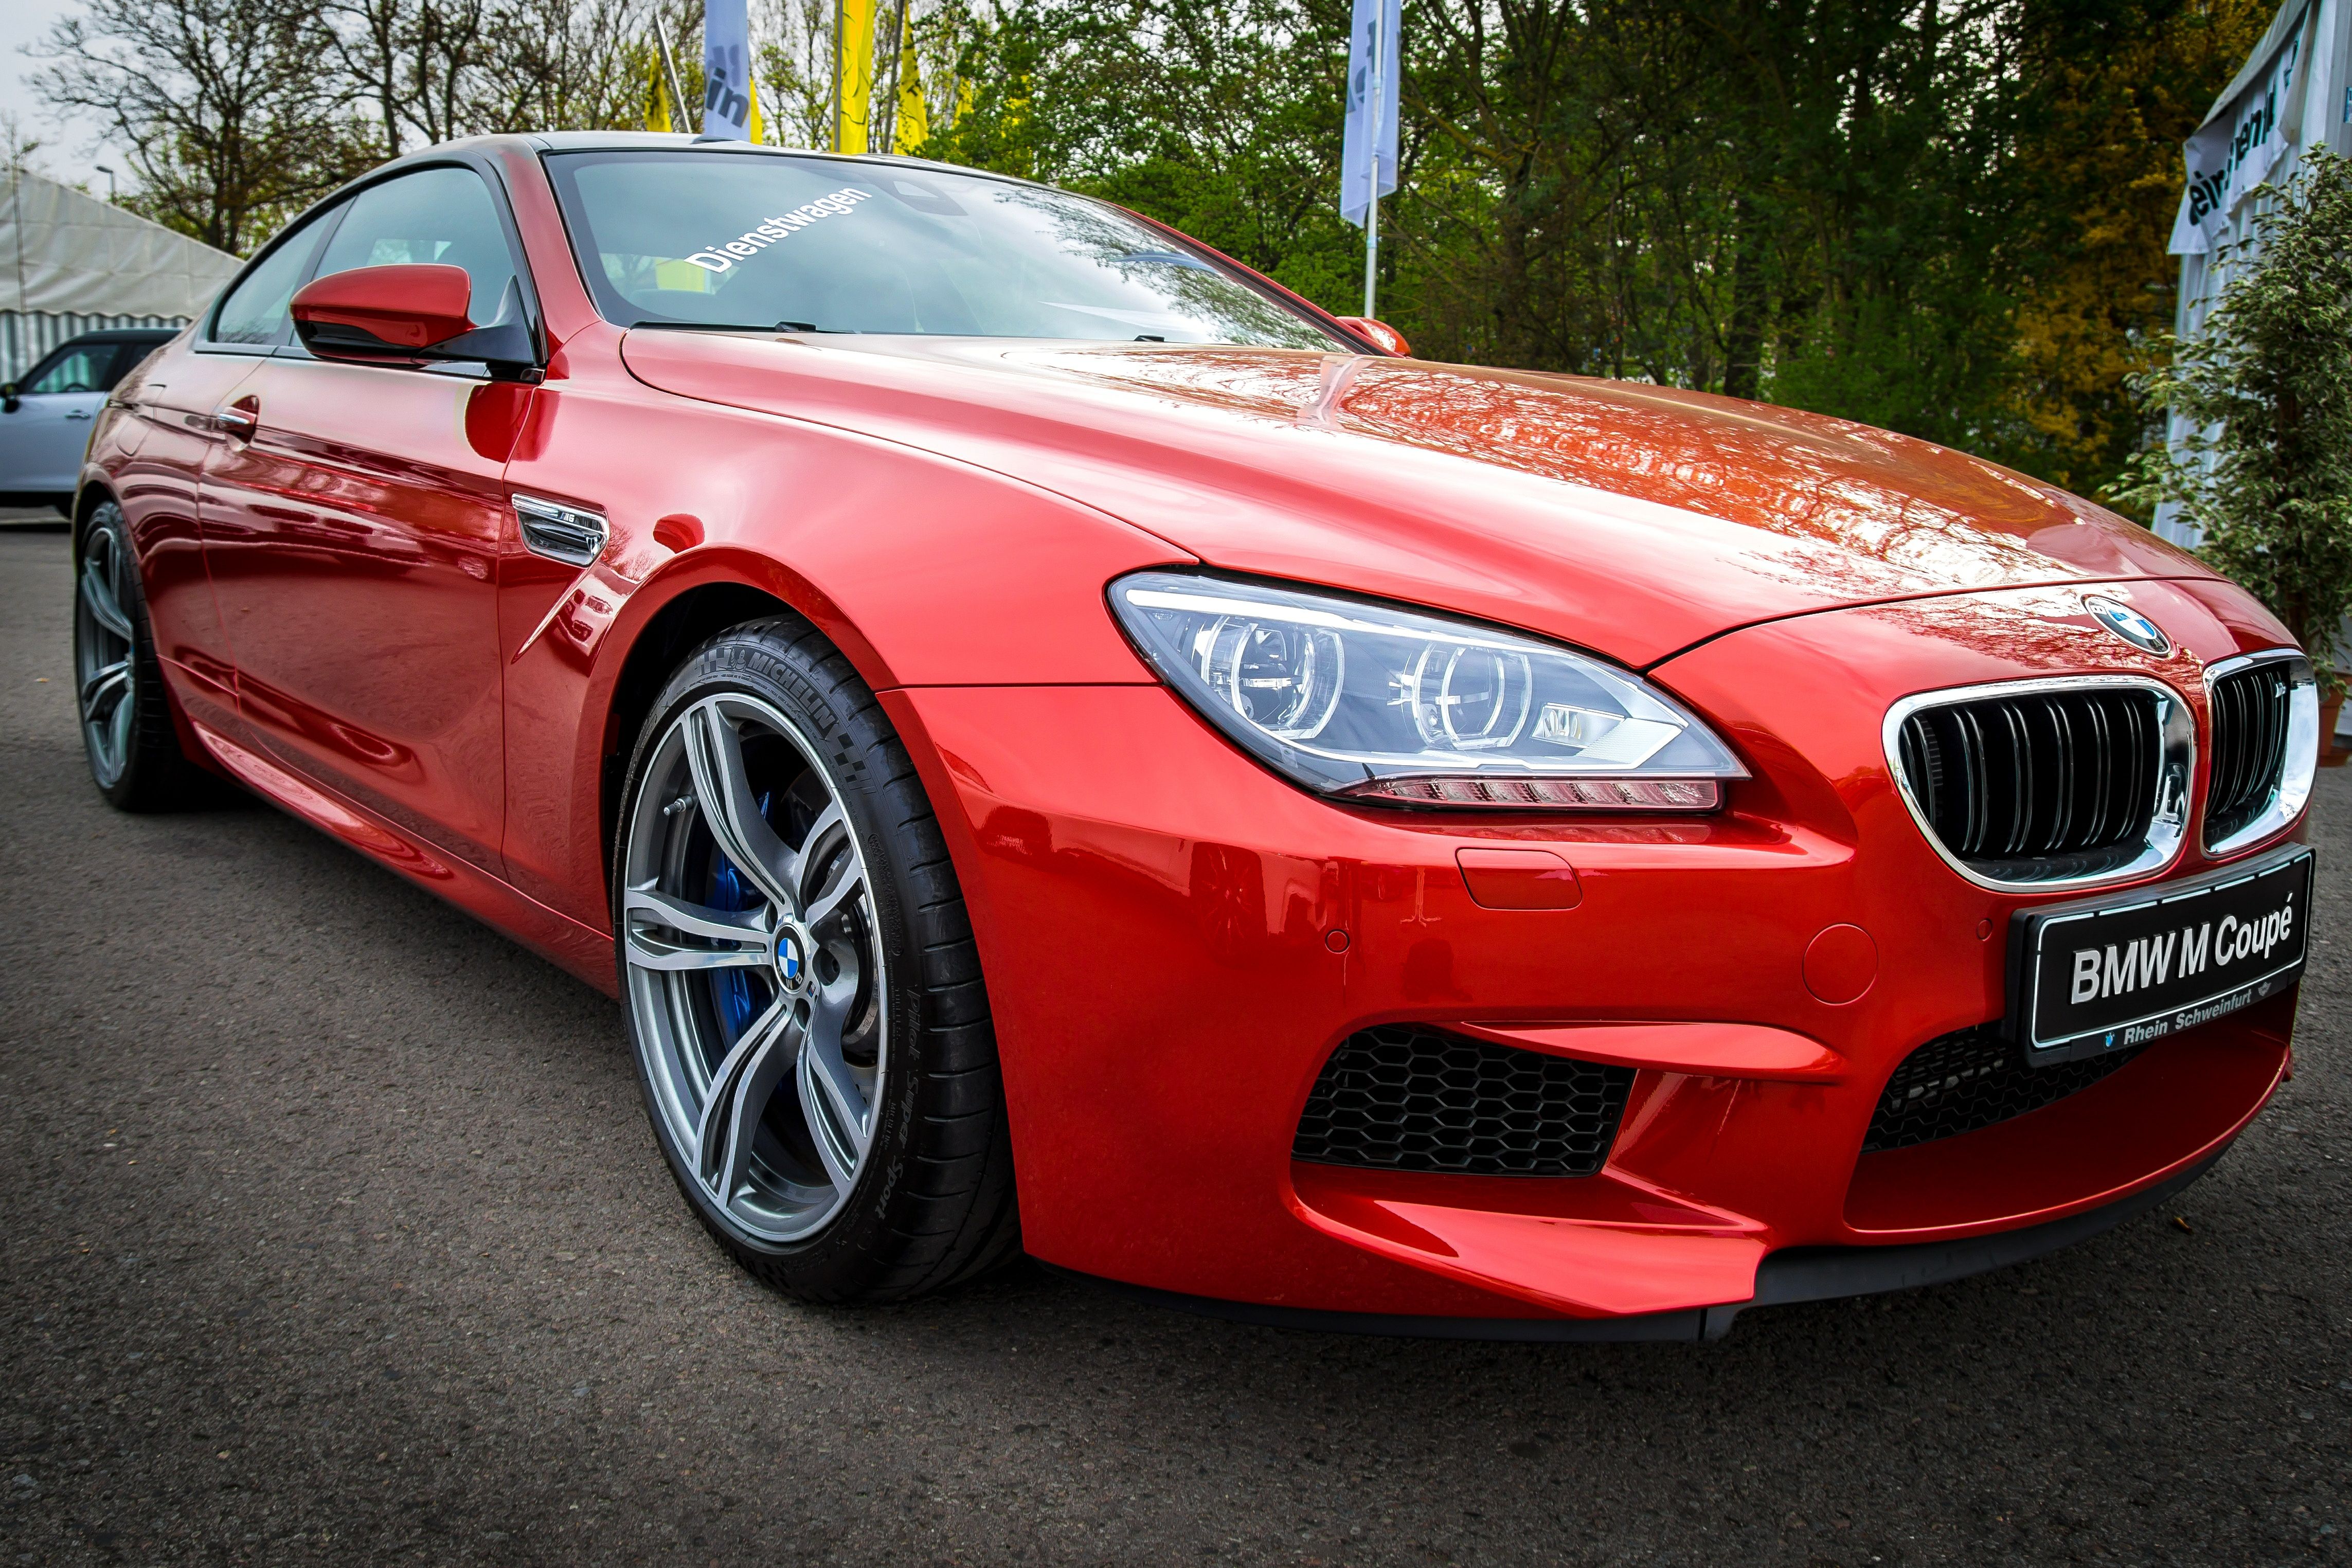 Red BMW M6 Coupe on road